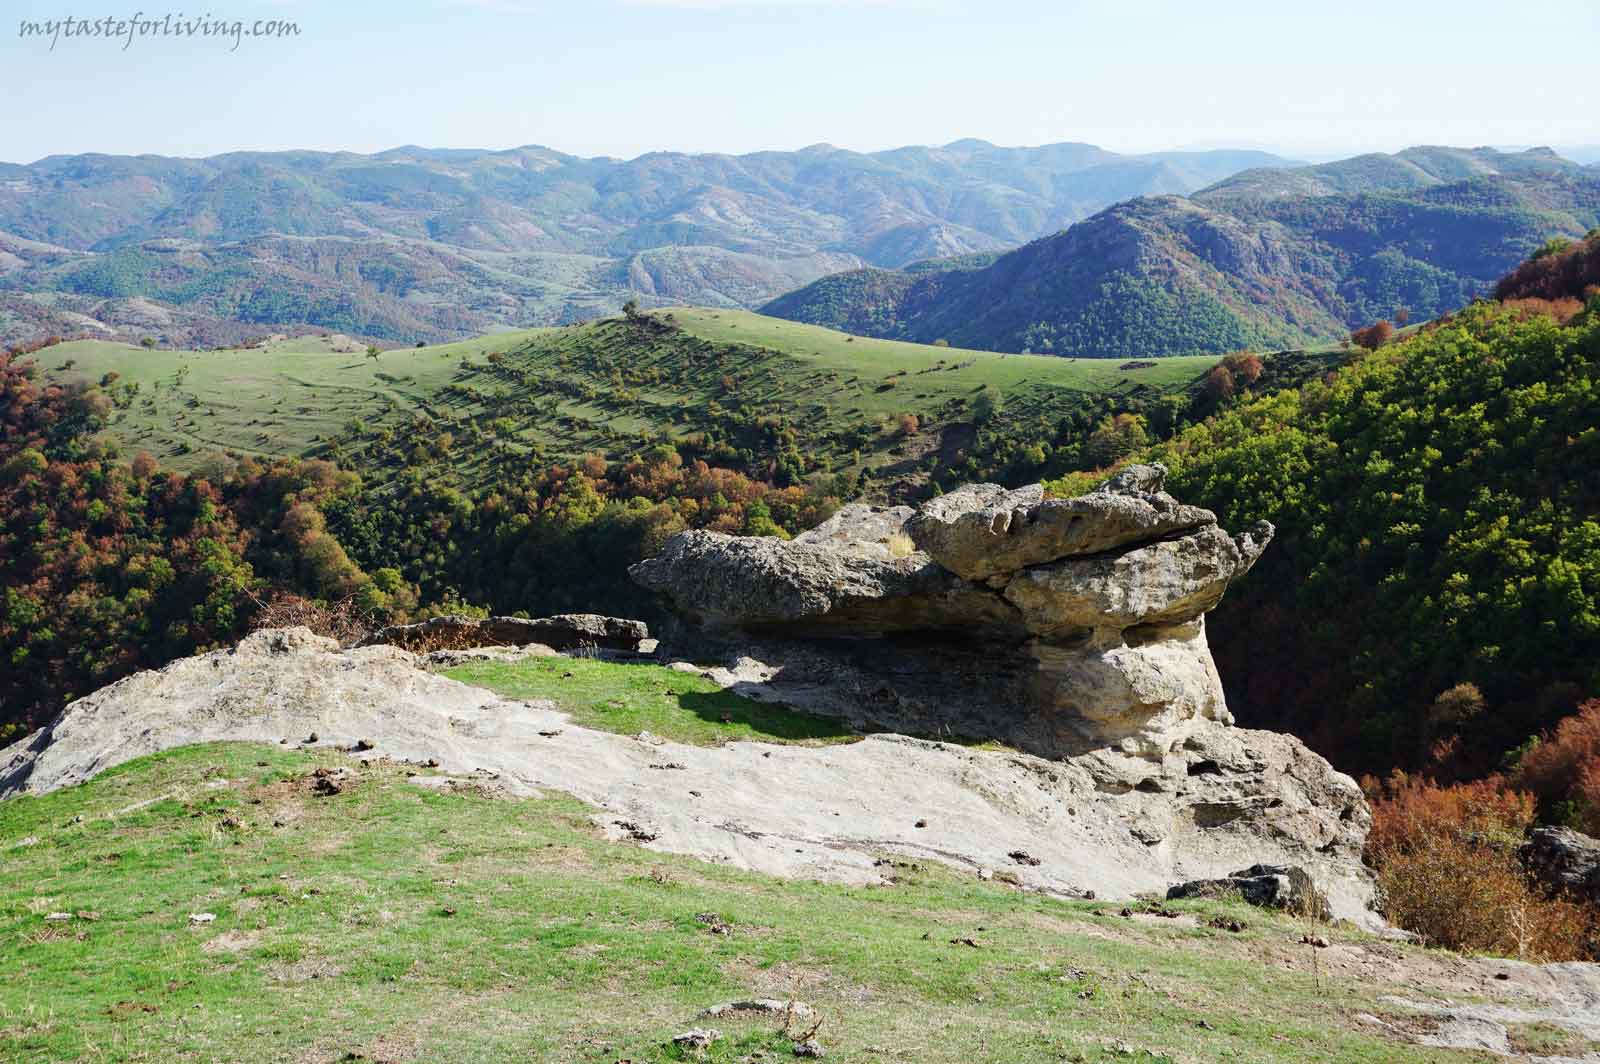 The Asar Kaya area is located less than two kilometers from the village of Zhenda, Chernoochene municipality, Kardzhali district, Bulgaria. The fortress is located on top of a high rock terrace, which is built of piles of stones, on which you can see many rock niches typical of the region. It is believed that the place has been sacred since the time of the thracians.